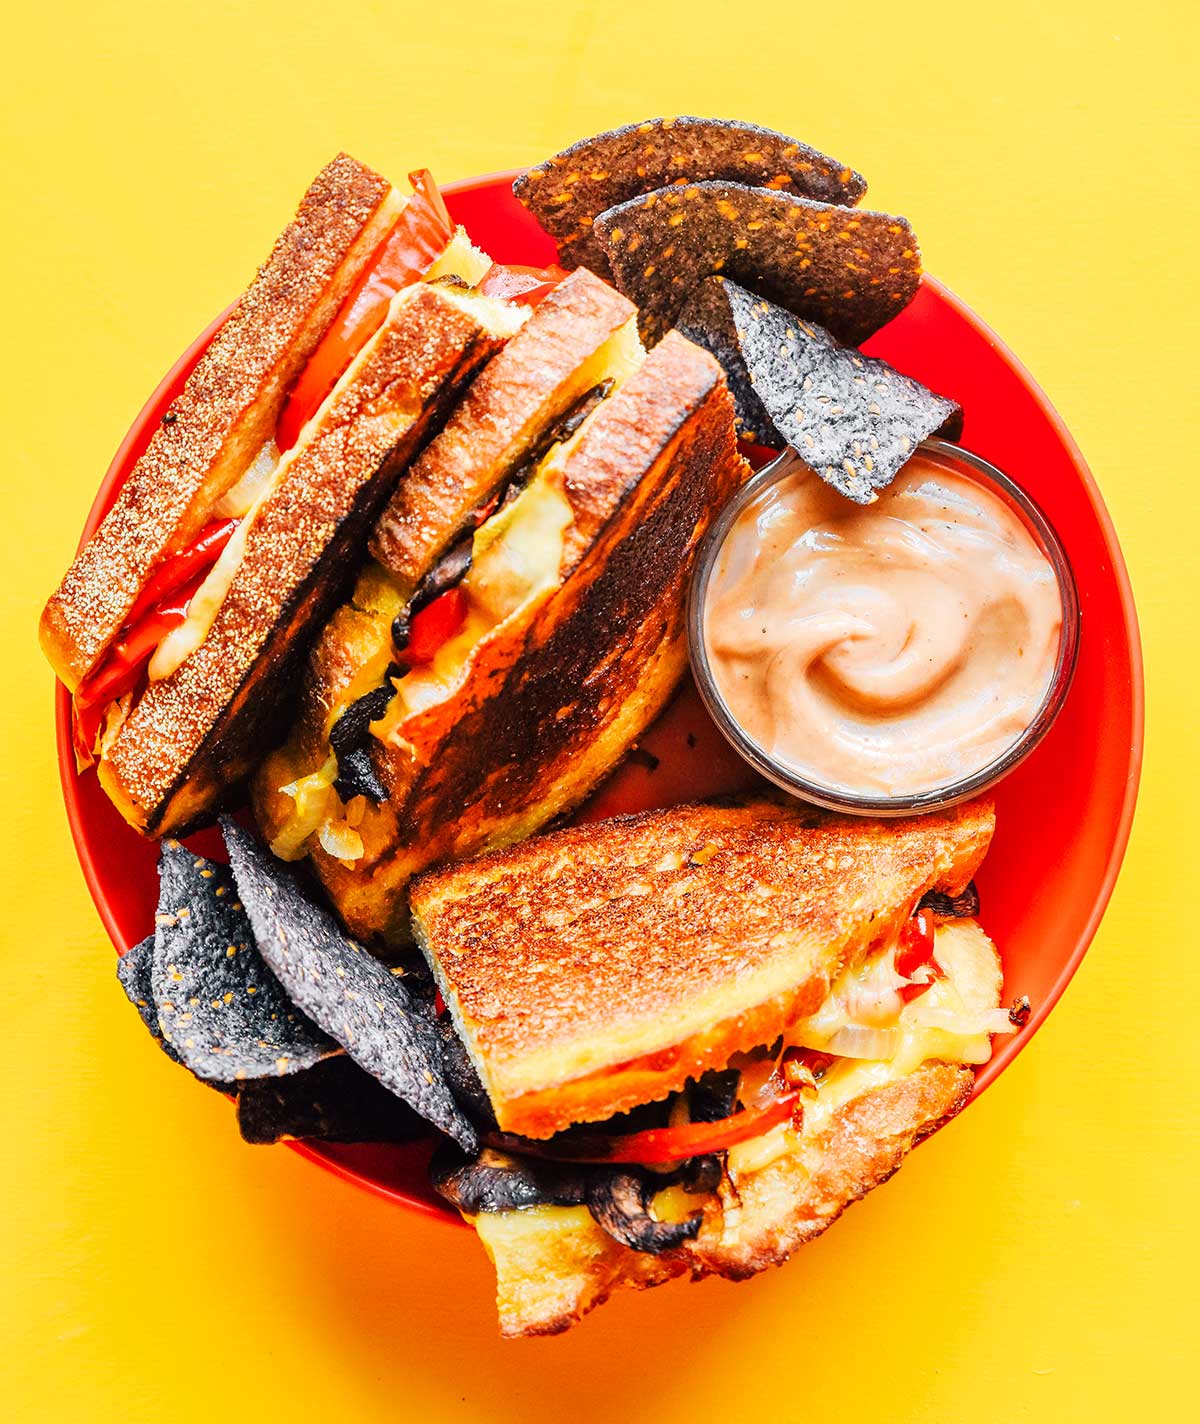 A plate filled with three roasted vegetable paninis, toasty sauce, and tortilla chips